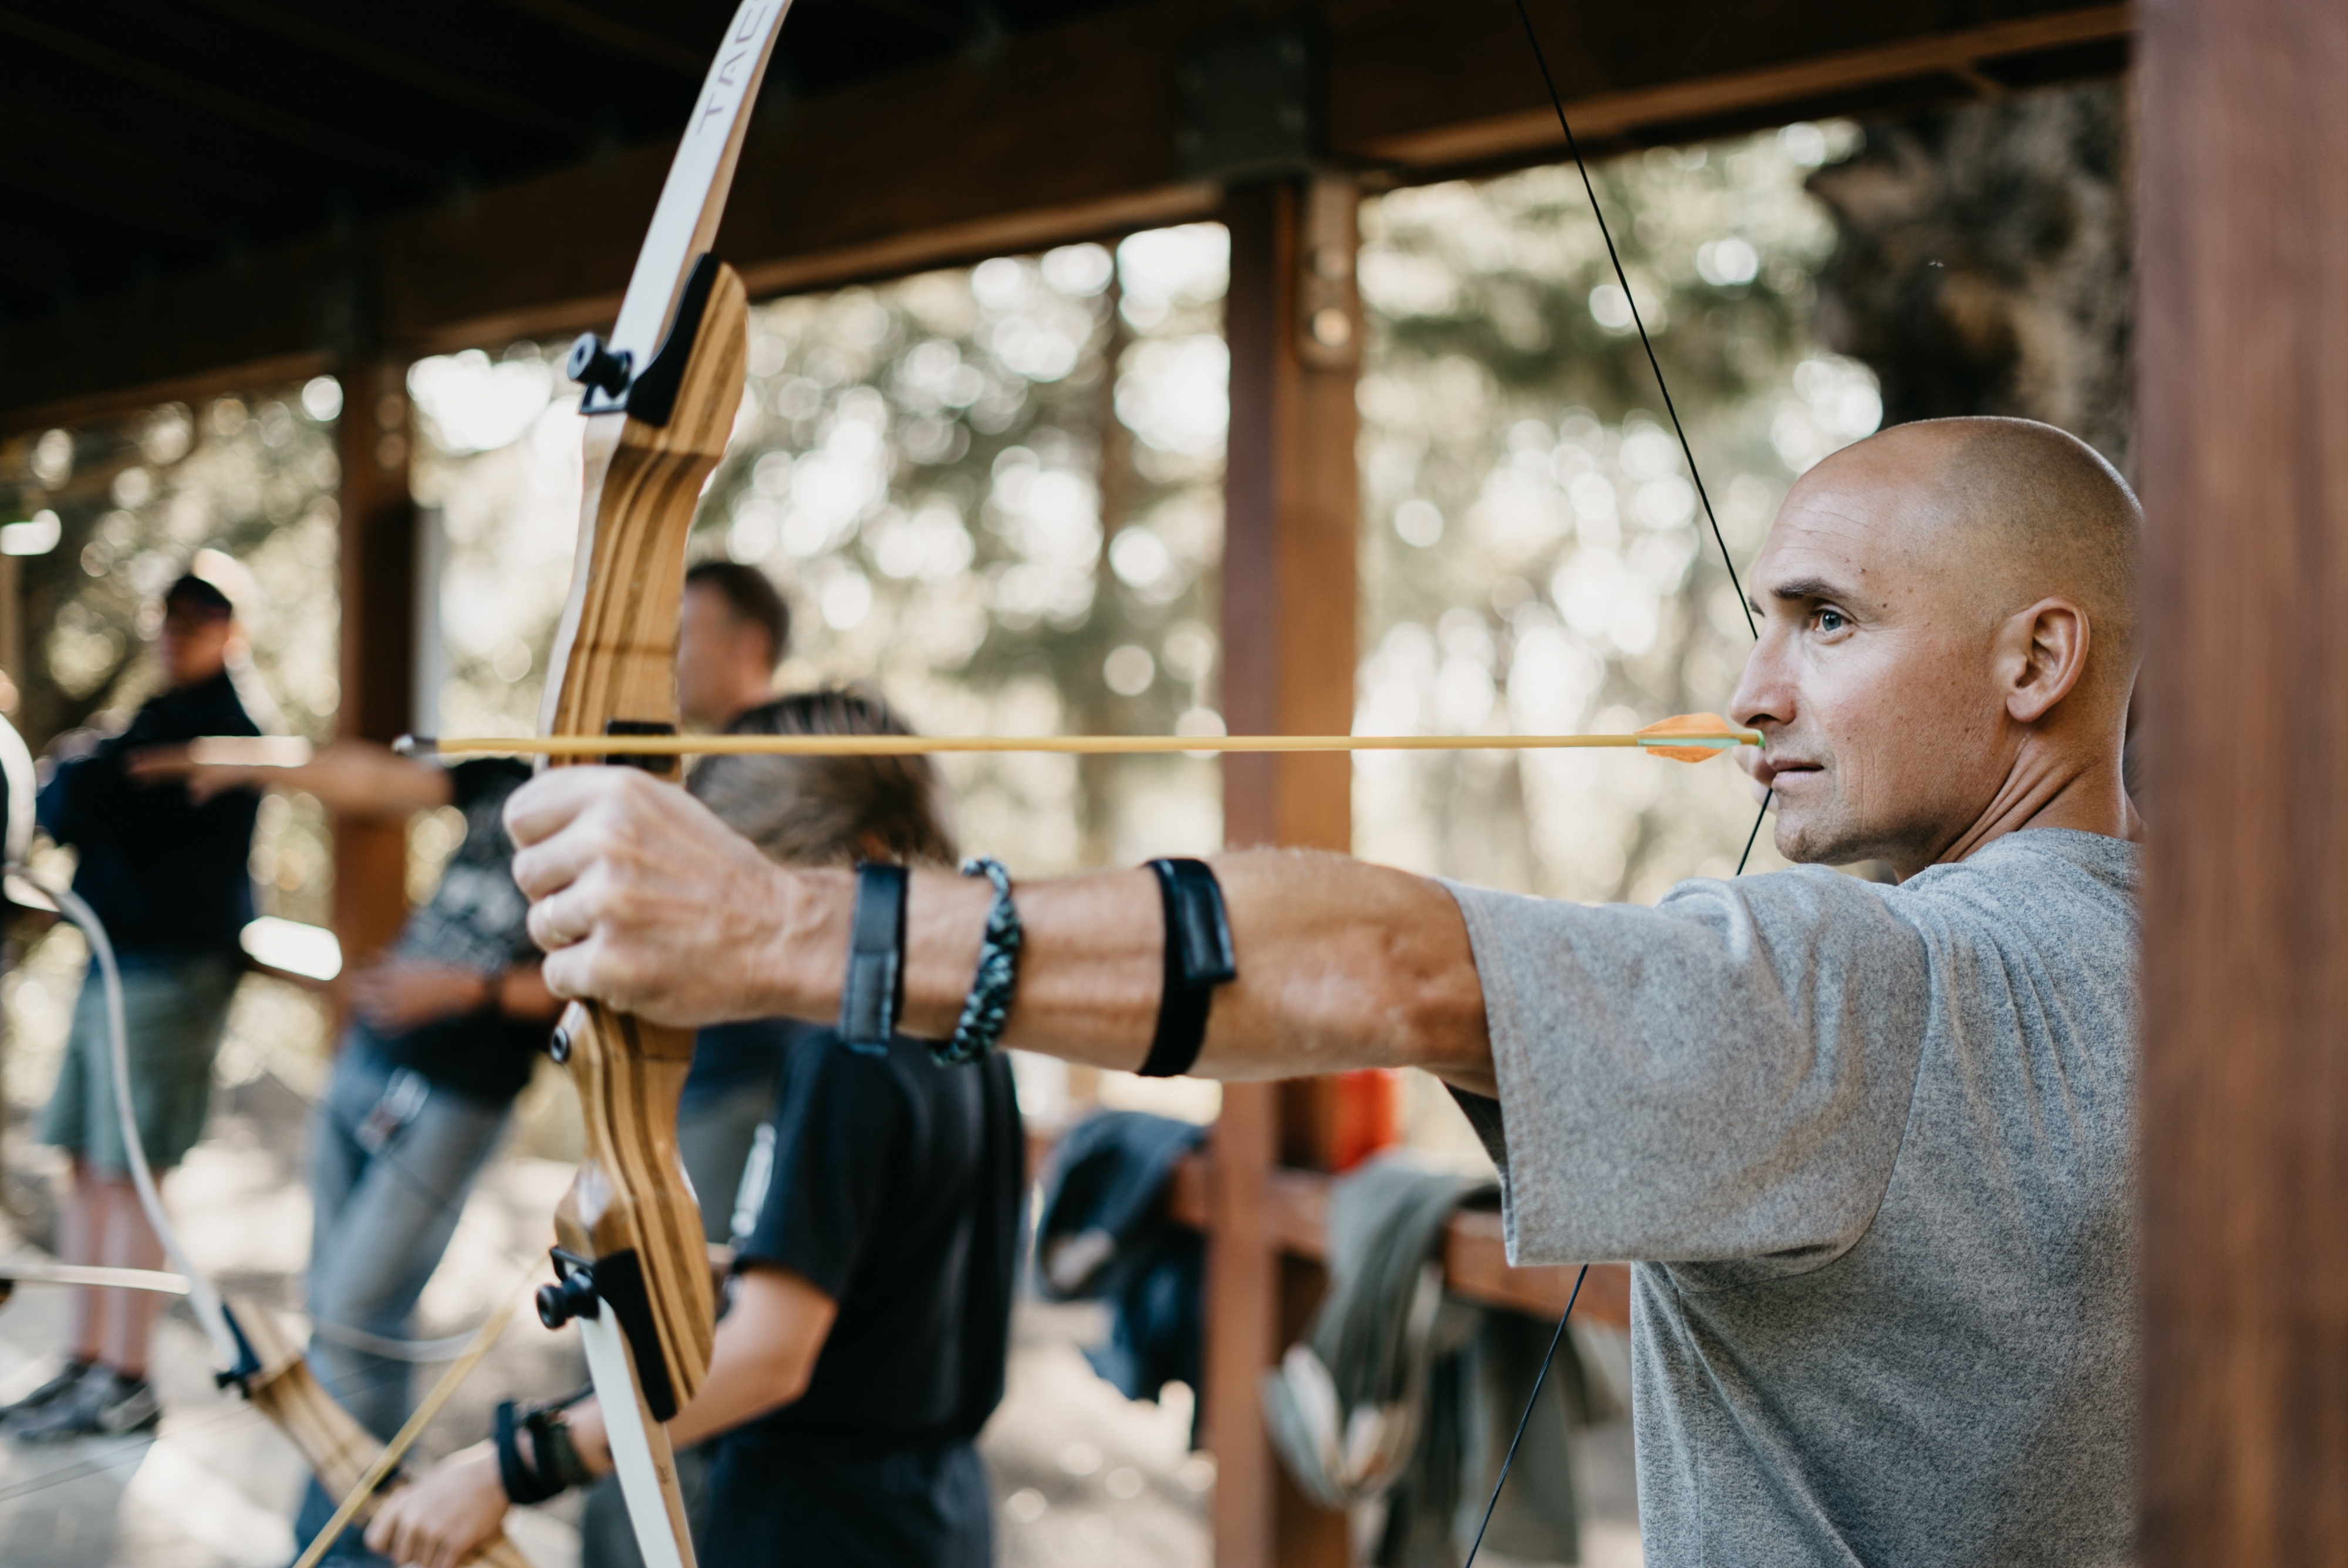 Close up of a person about to fire an archery arrow